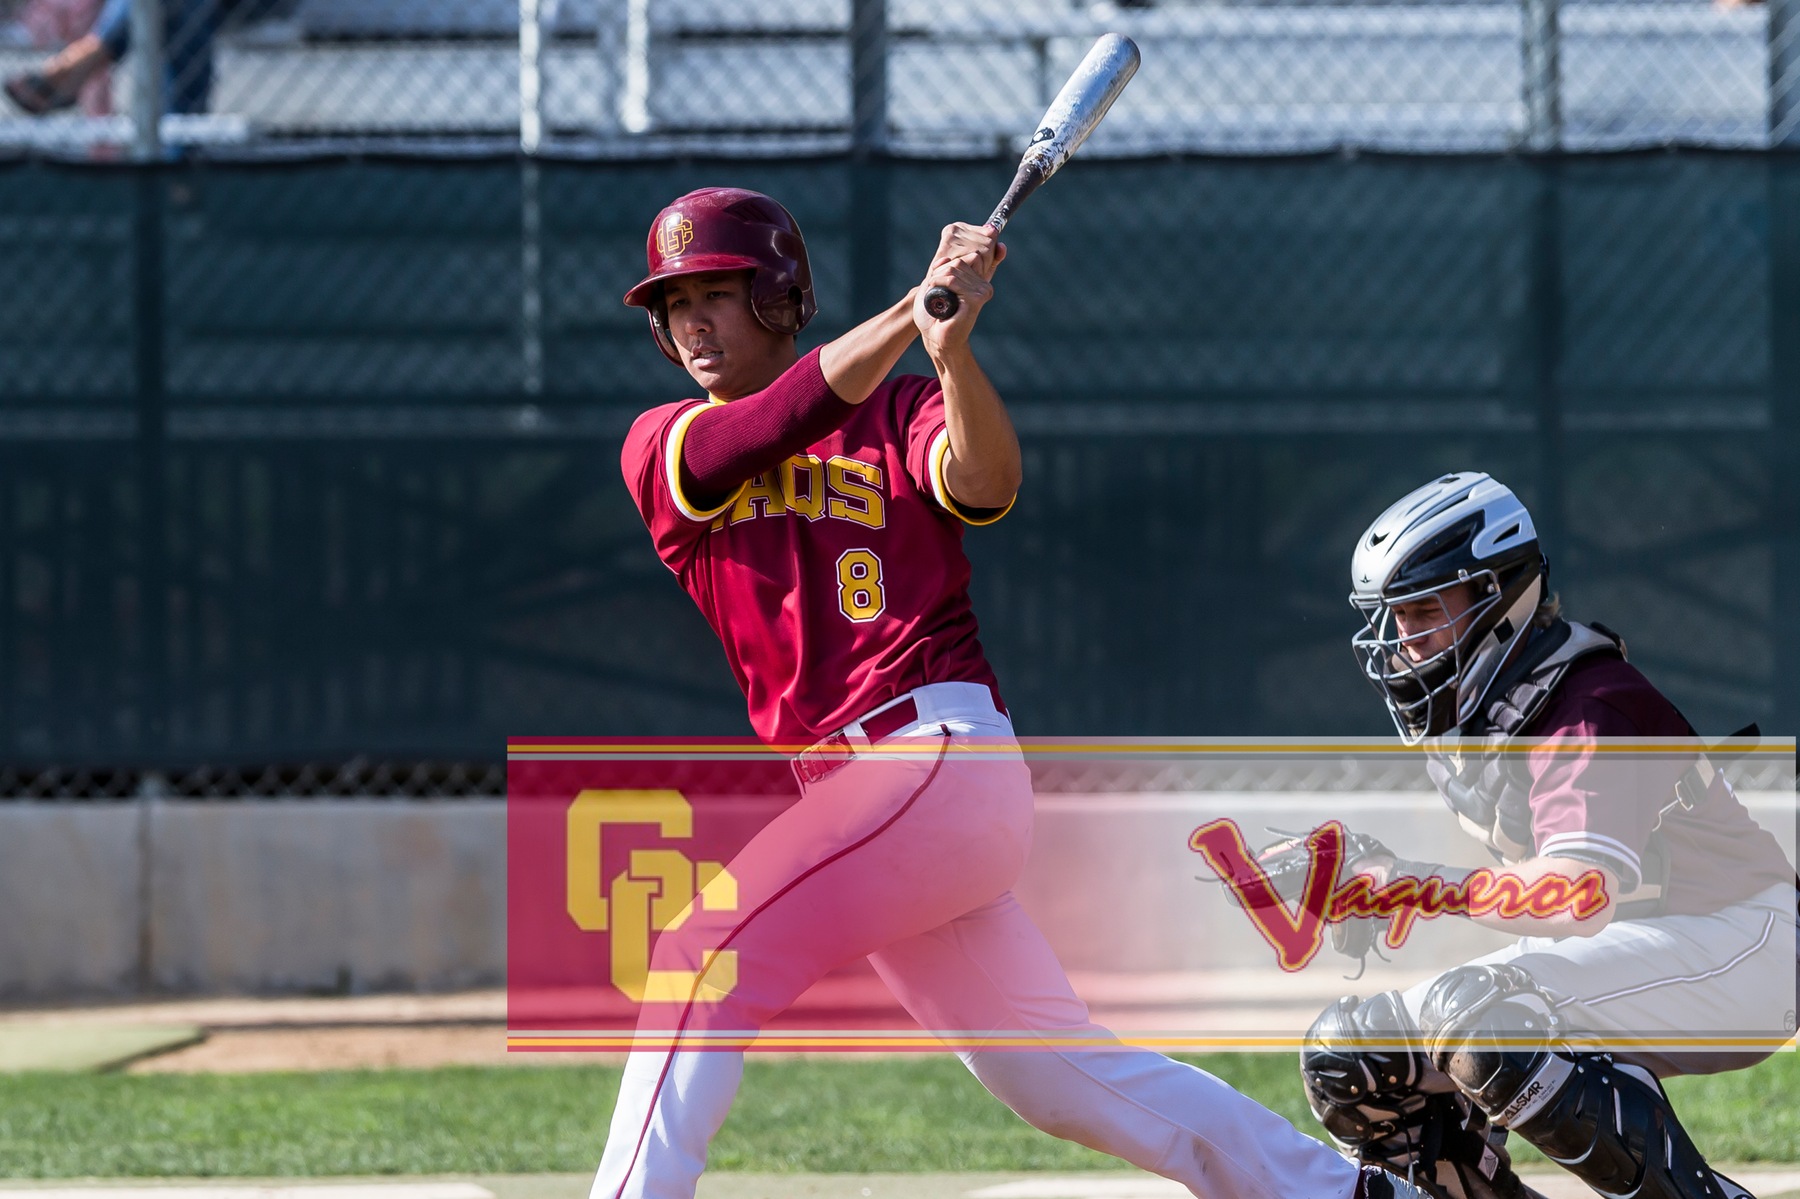 Jacob Gribbin pounds out six hits in wins over Victor Valley and Barstow